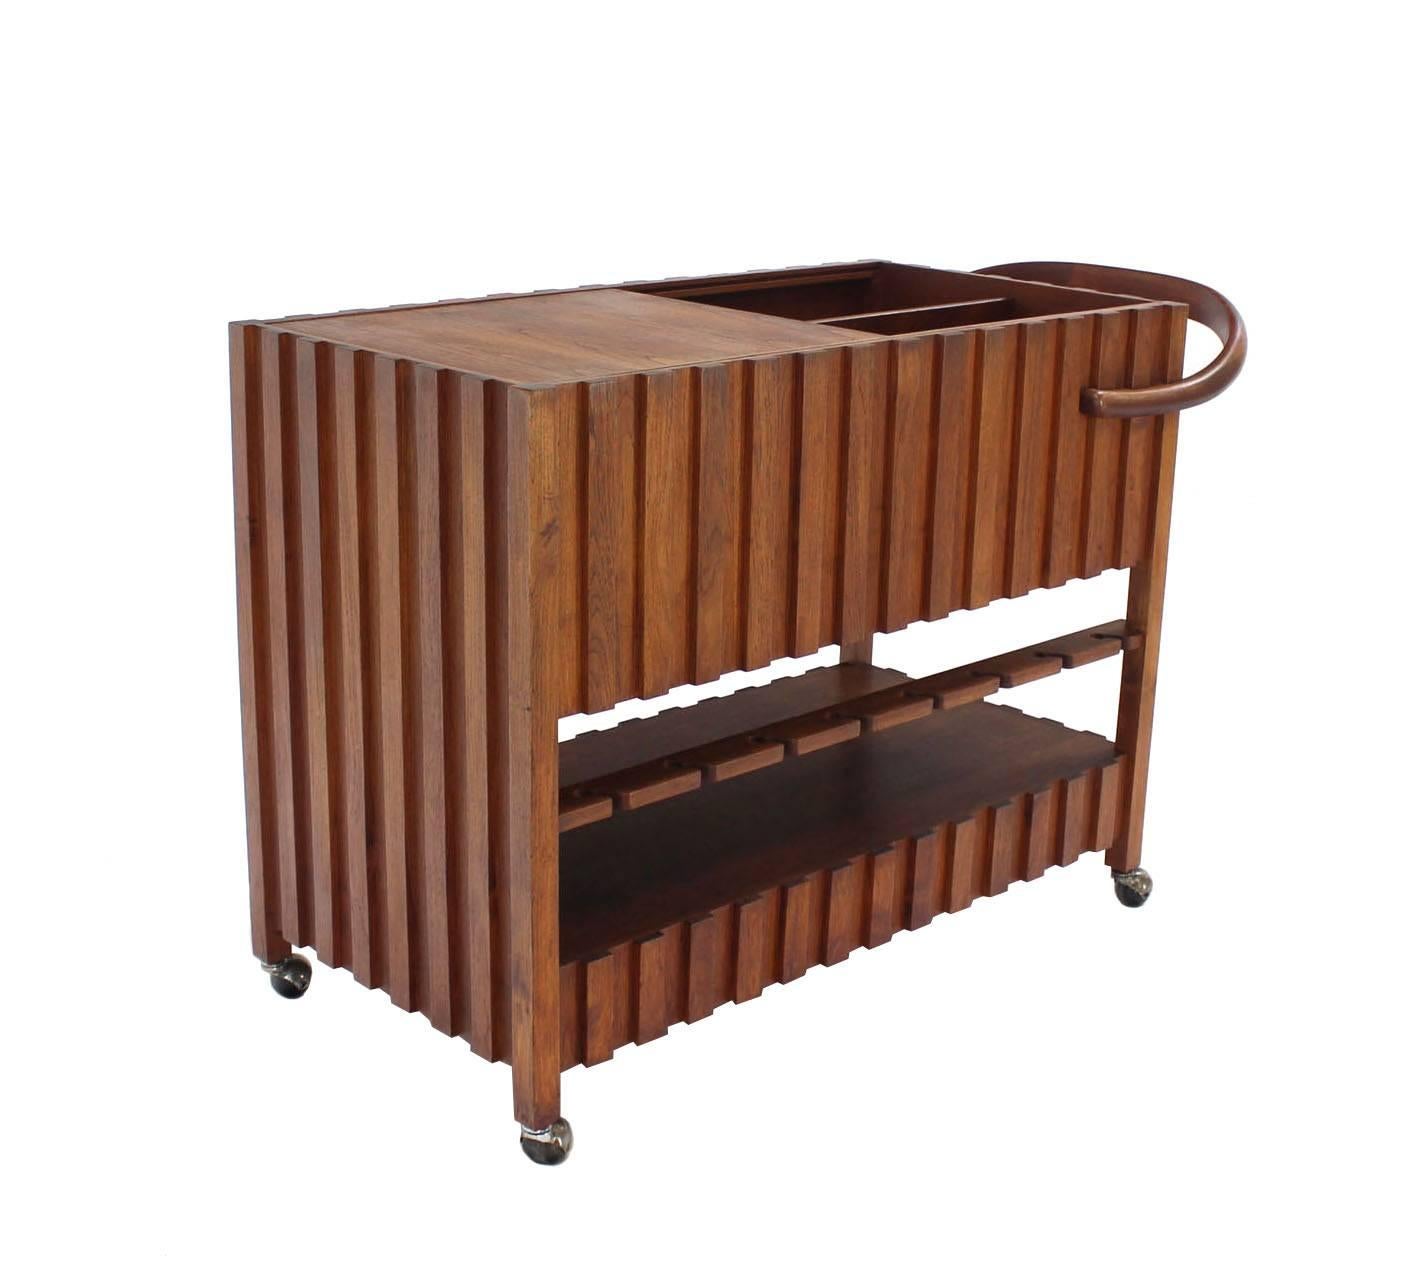 Very nice solid oiled walnut mid century modern bar cart in style of Adrian Pearsall.